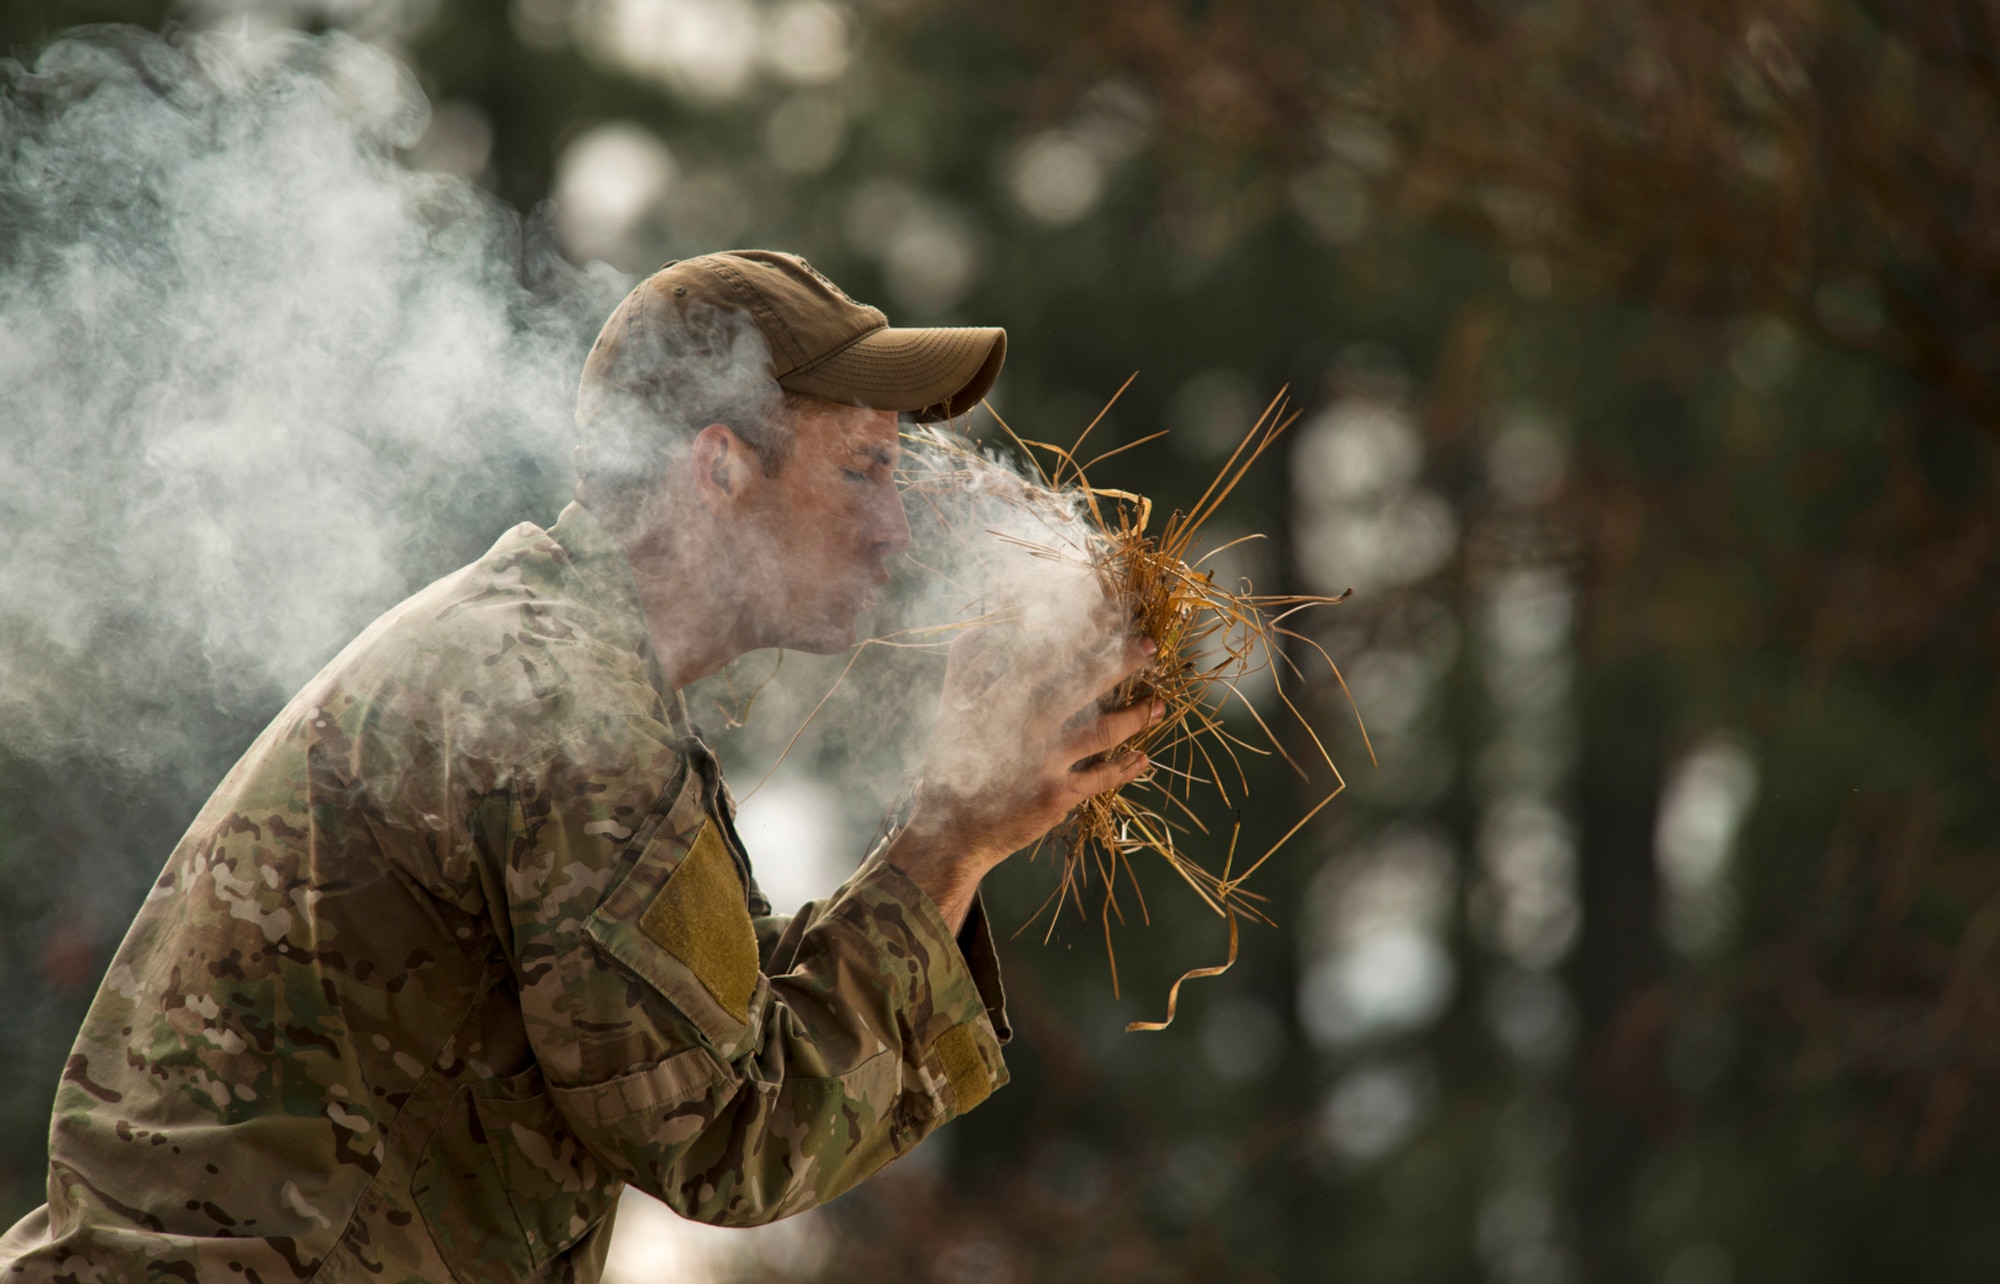 Senior Airman Joseph Collett, a survival, evasion, resistance and escape instructor, teaches the "bird's nest" technique of building a fire by igniting a small piece of flammable material with flint rocks and placing it inside a "nest" of weeds while blowing air into the nest to help the flame grow. (U.S. Air Force photo/Tech. Sgt. Bennie J. Davis III)